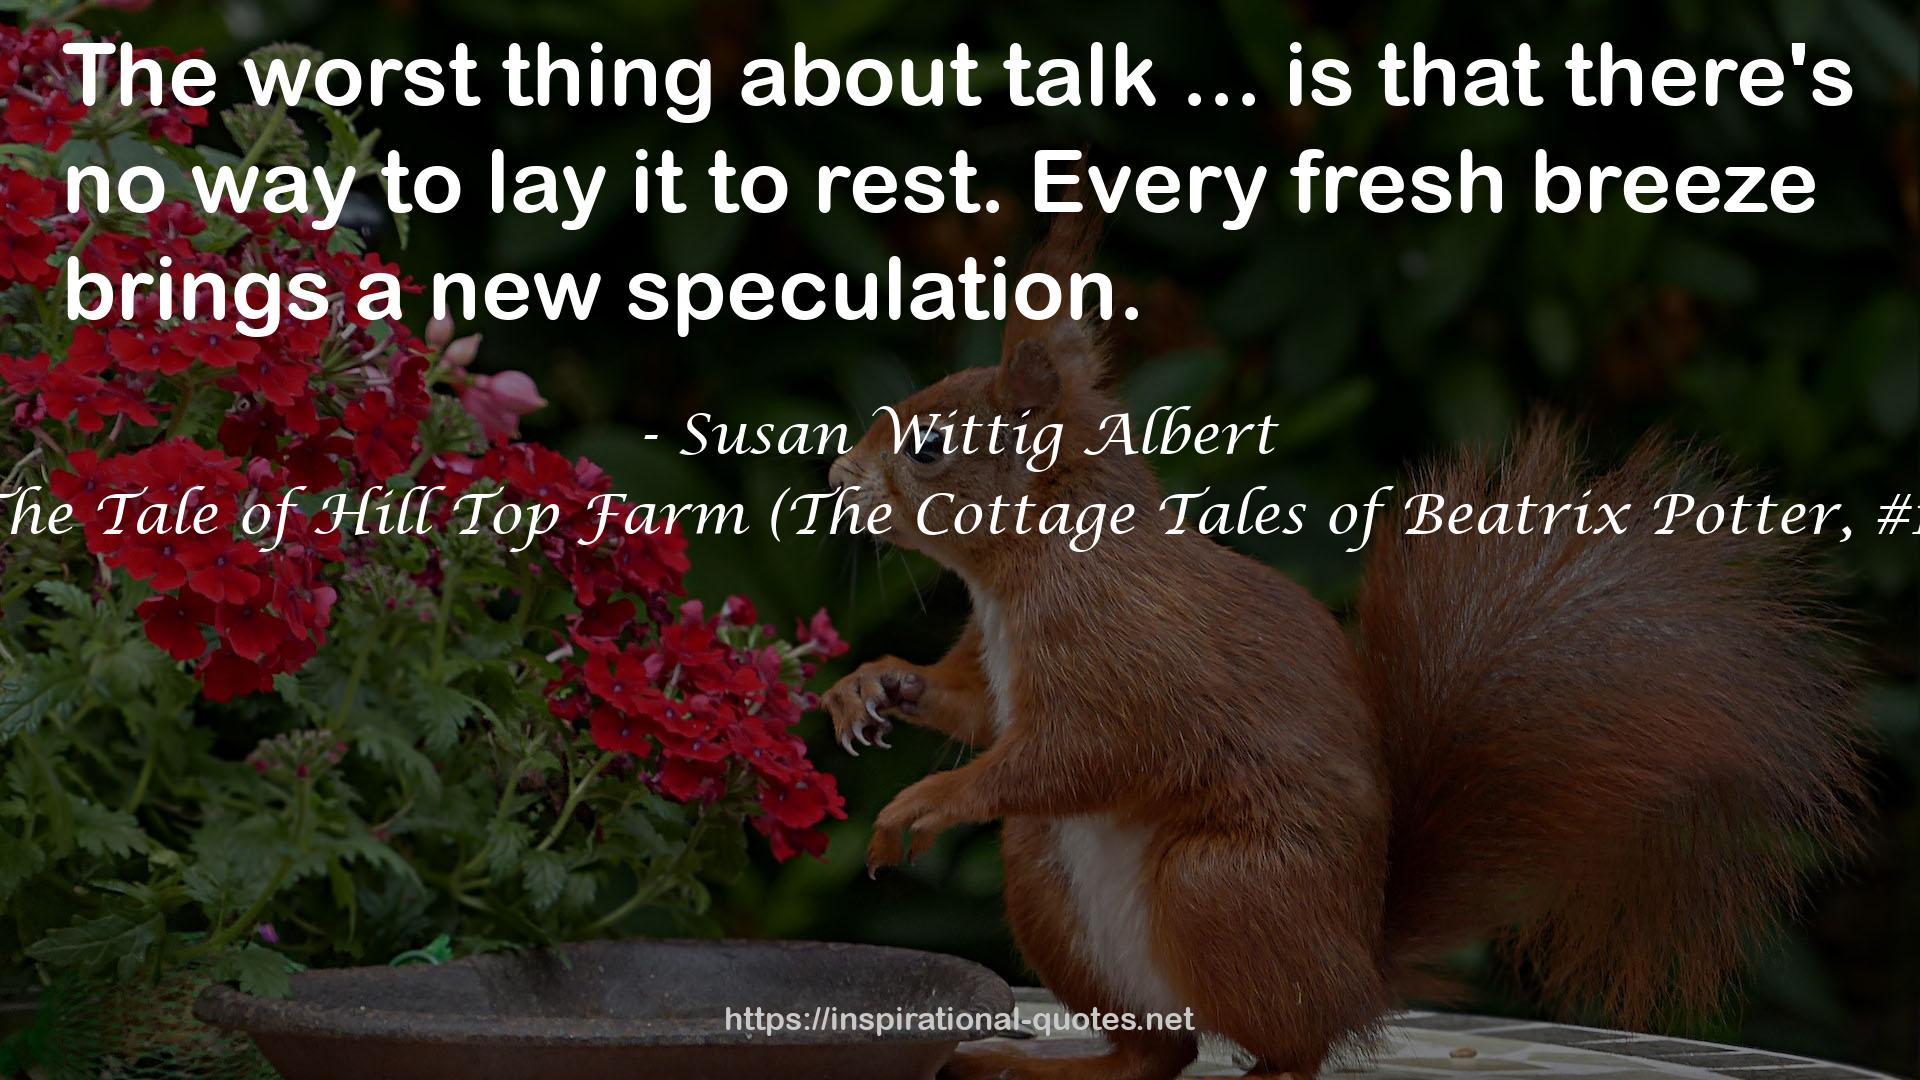 The Tale of Hill Top Farm (The Cottage Tales of Beatrix Potter, #1) QUOTES